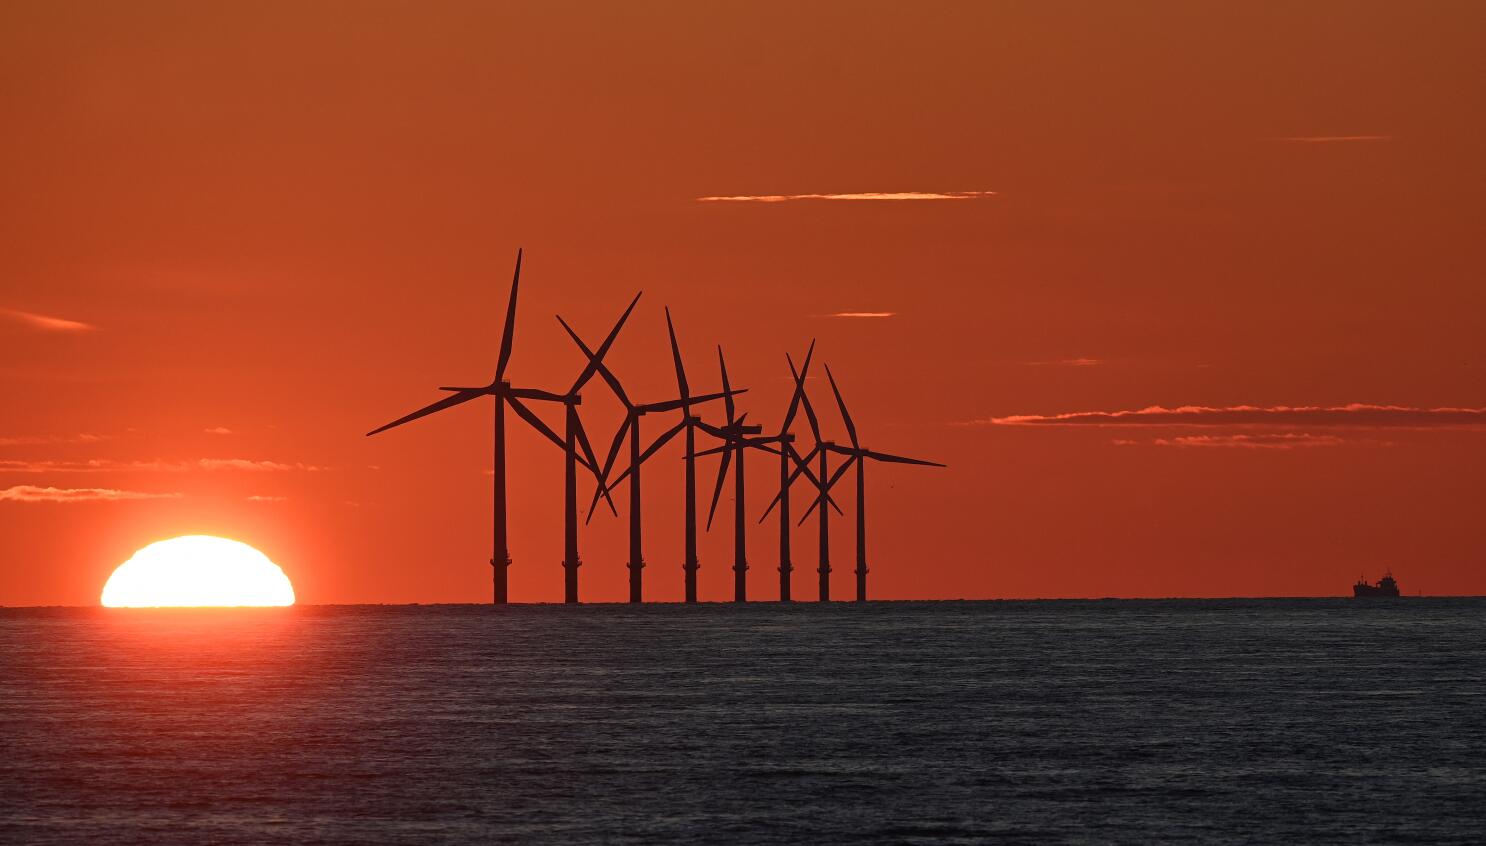 U.S. to boost offshore wind energy as industry sees growth - Los